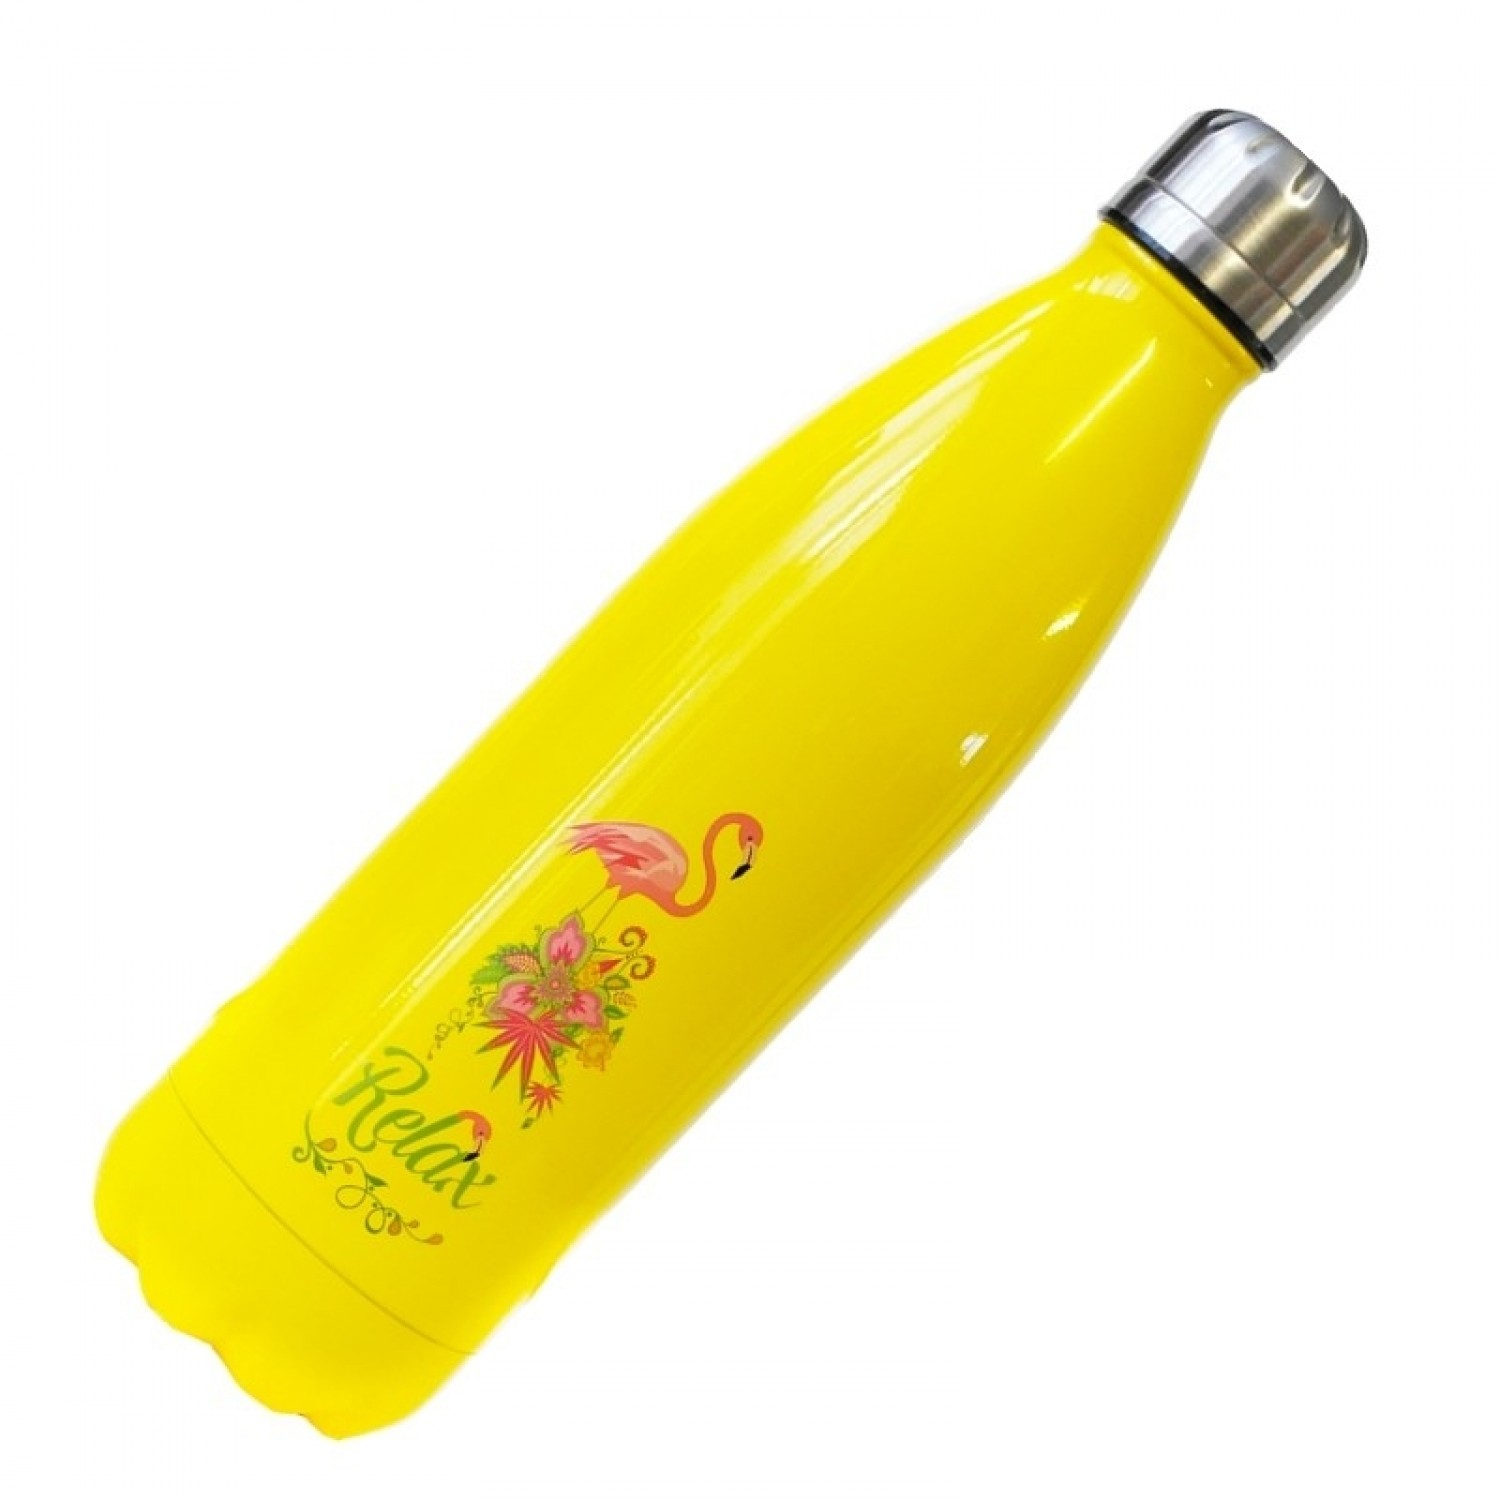 Dora’s Thermosbottle made of Stainless Steel Yellow Flamino